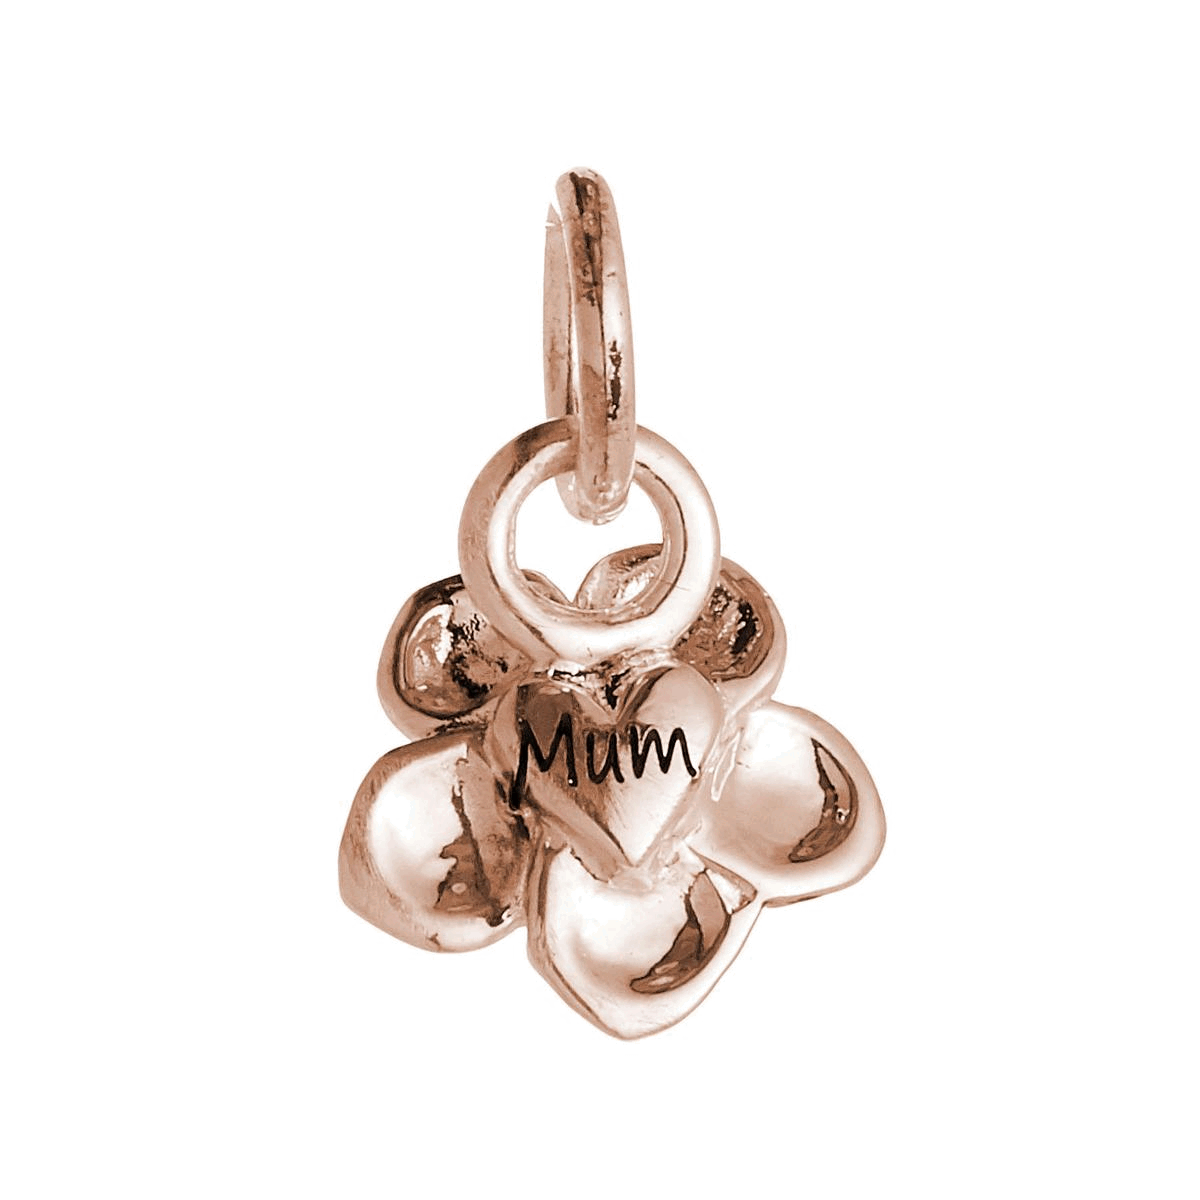 rose gold vermeil forget me not flower charm with engraved Mum on the back